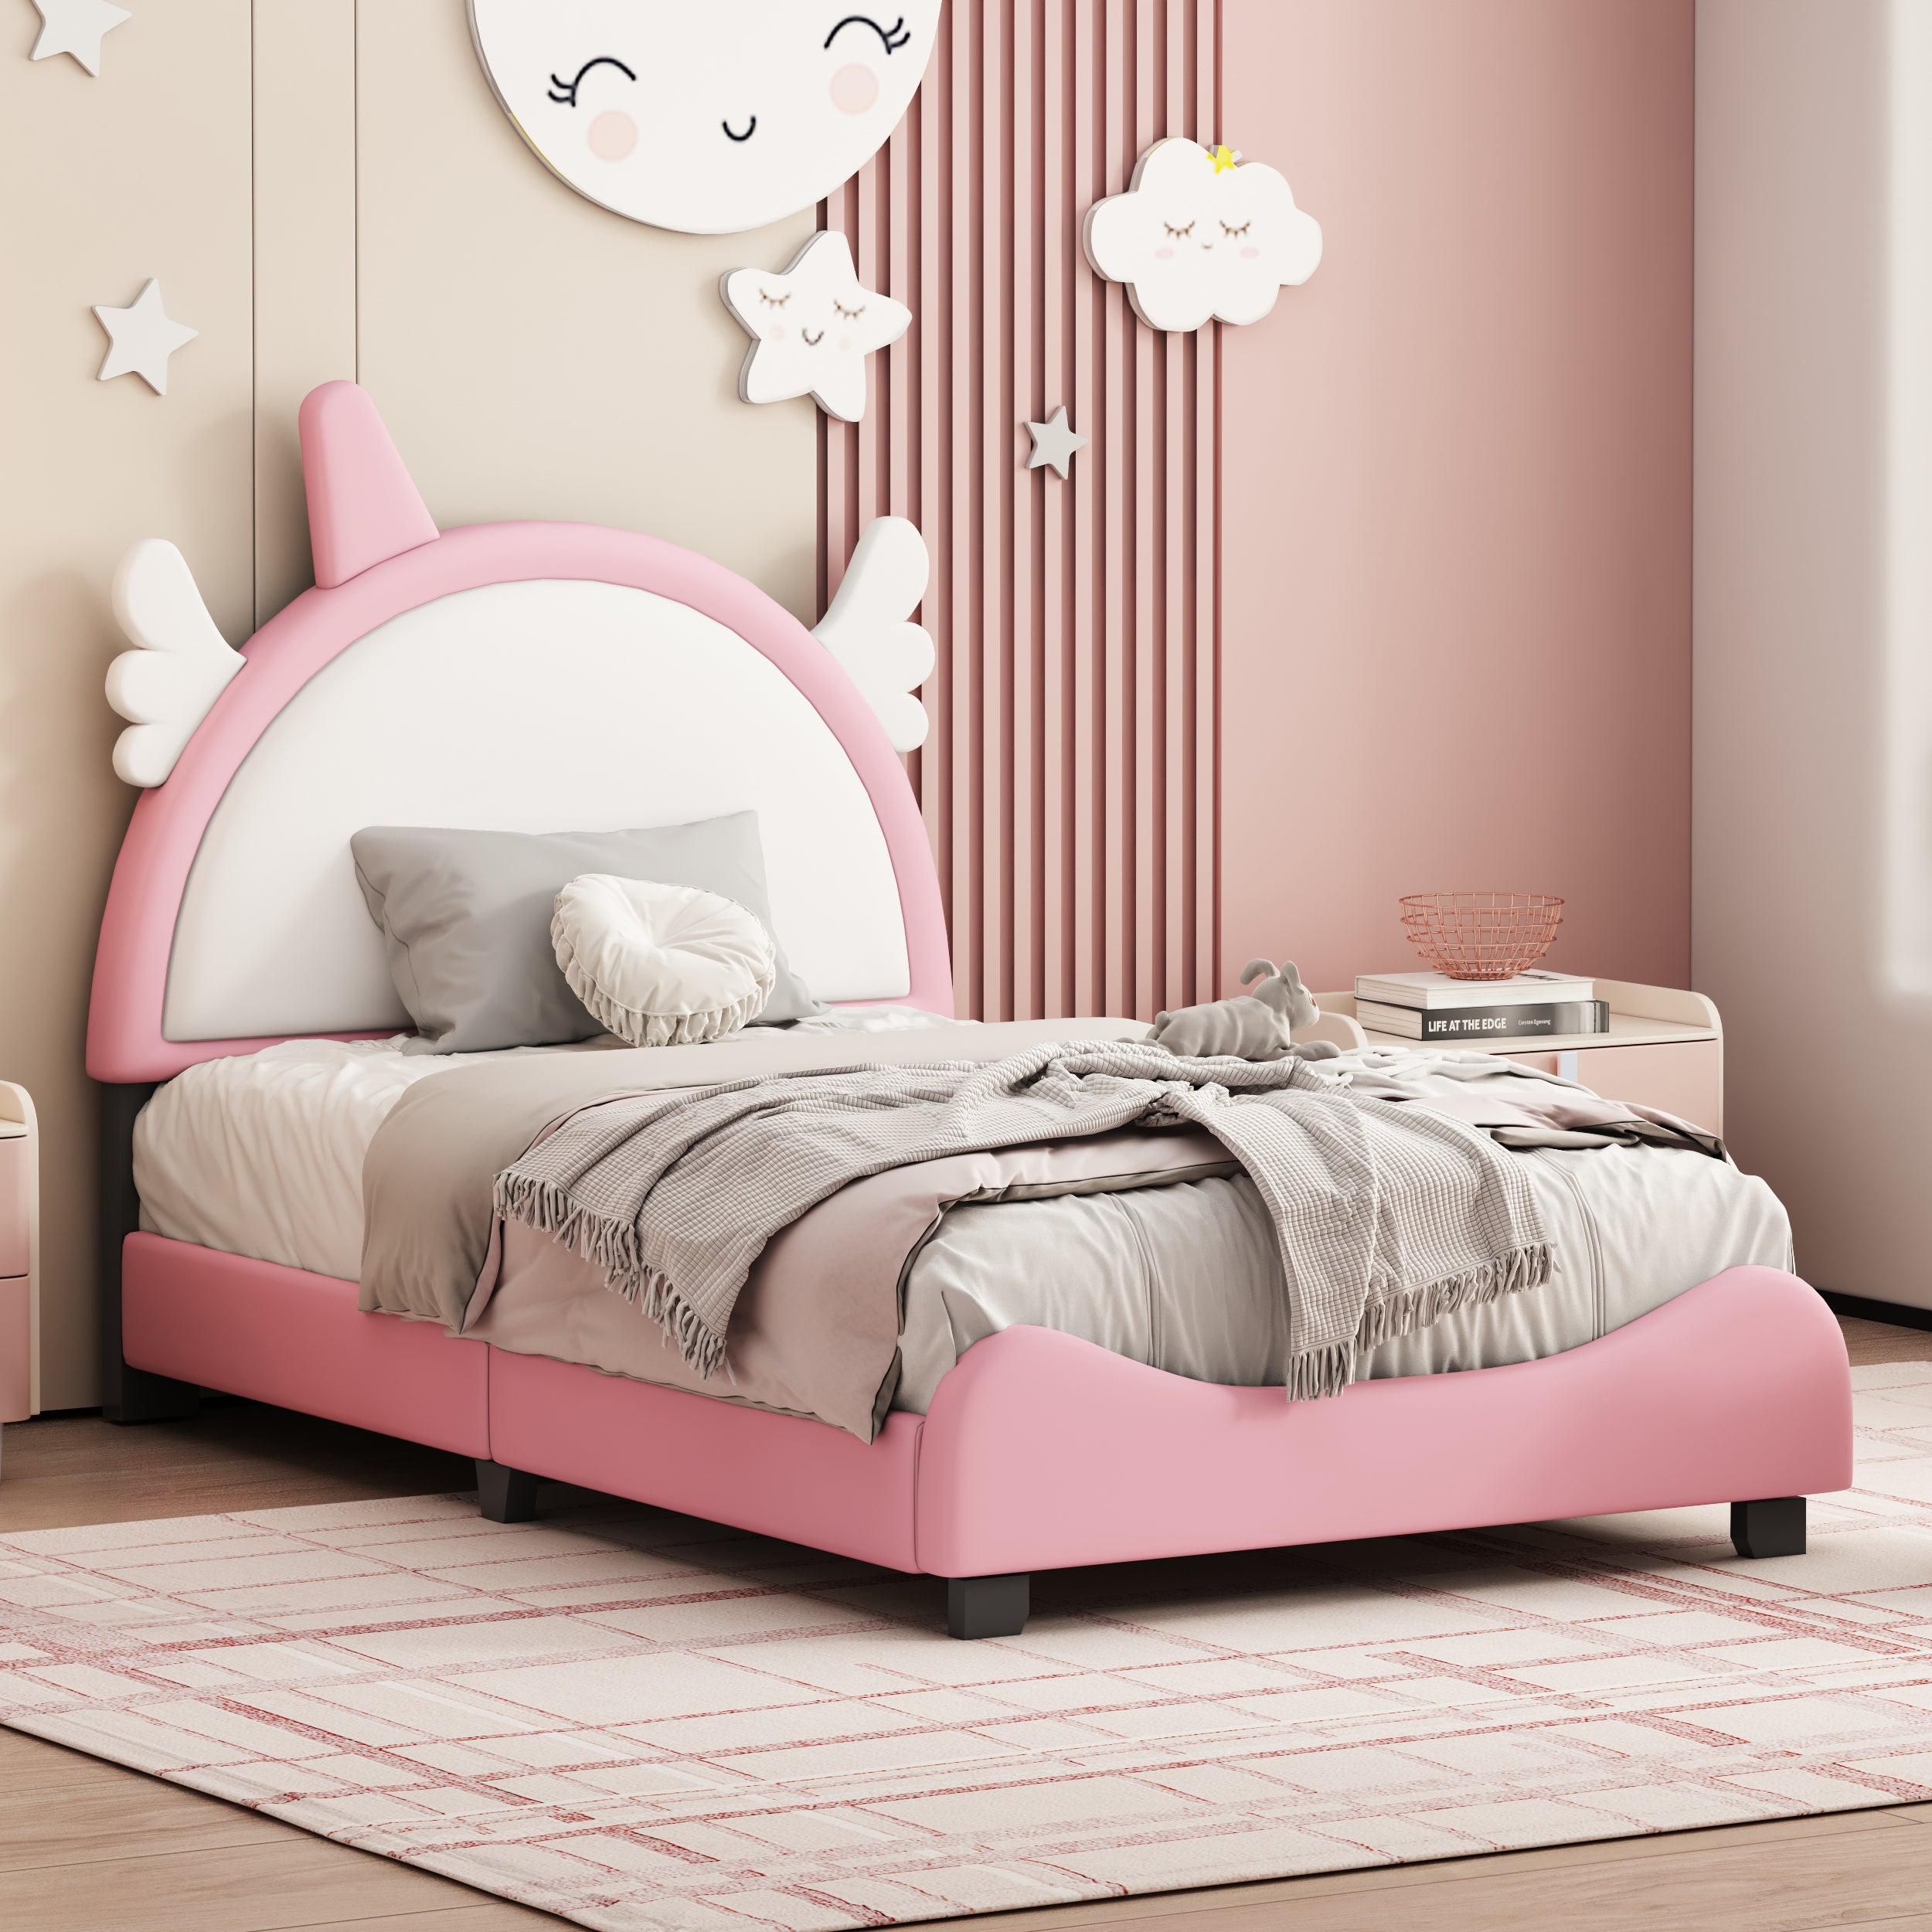 🆓🚛 Cute Twin Size Upholstered Bed With Unicorn Shape Headboard, Twin Size Platform Bed With Headboard and Footboard, White+Pink